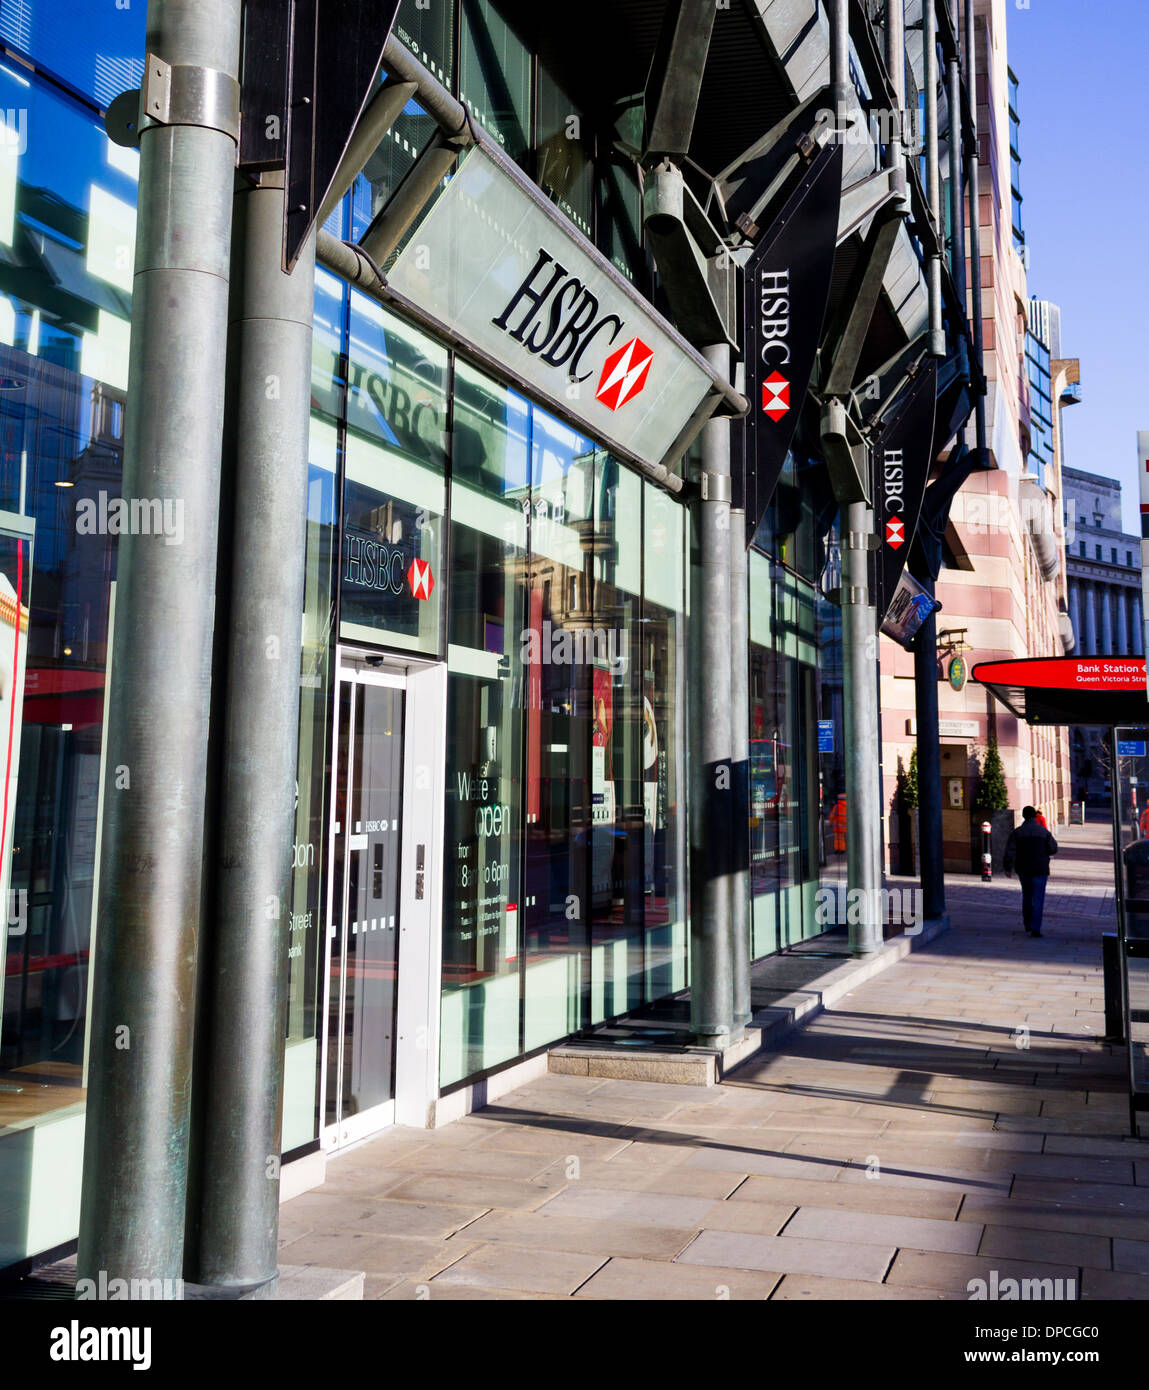 London, UK - January 11, 2014: The outside of a HSBC branch in central London Stock Photo